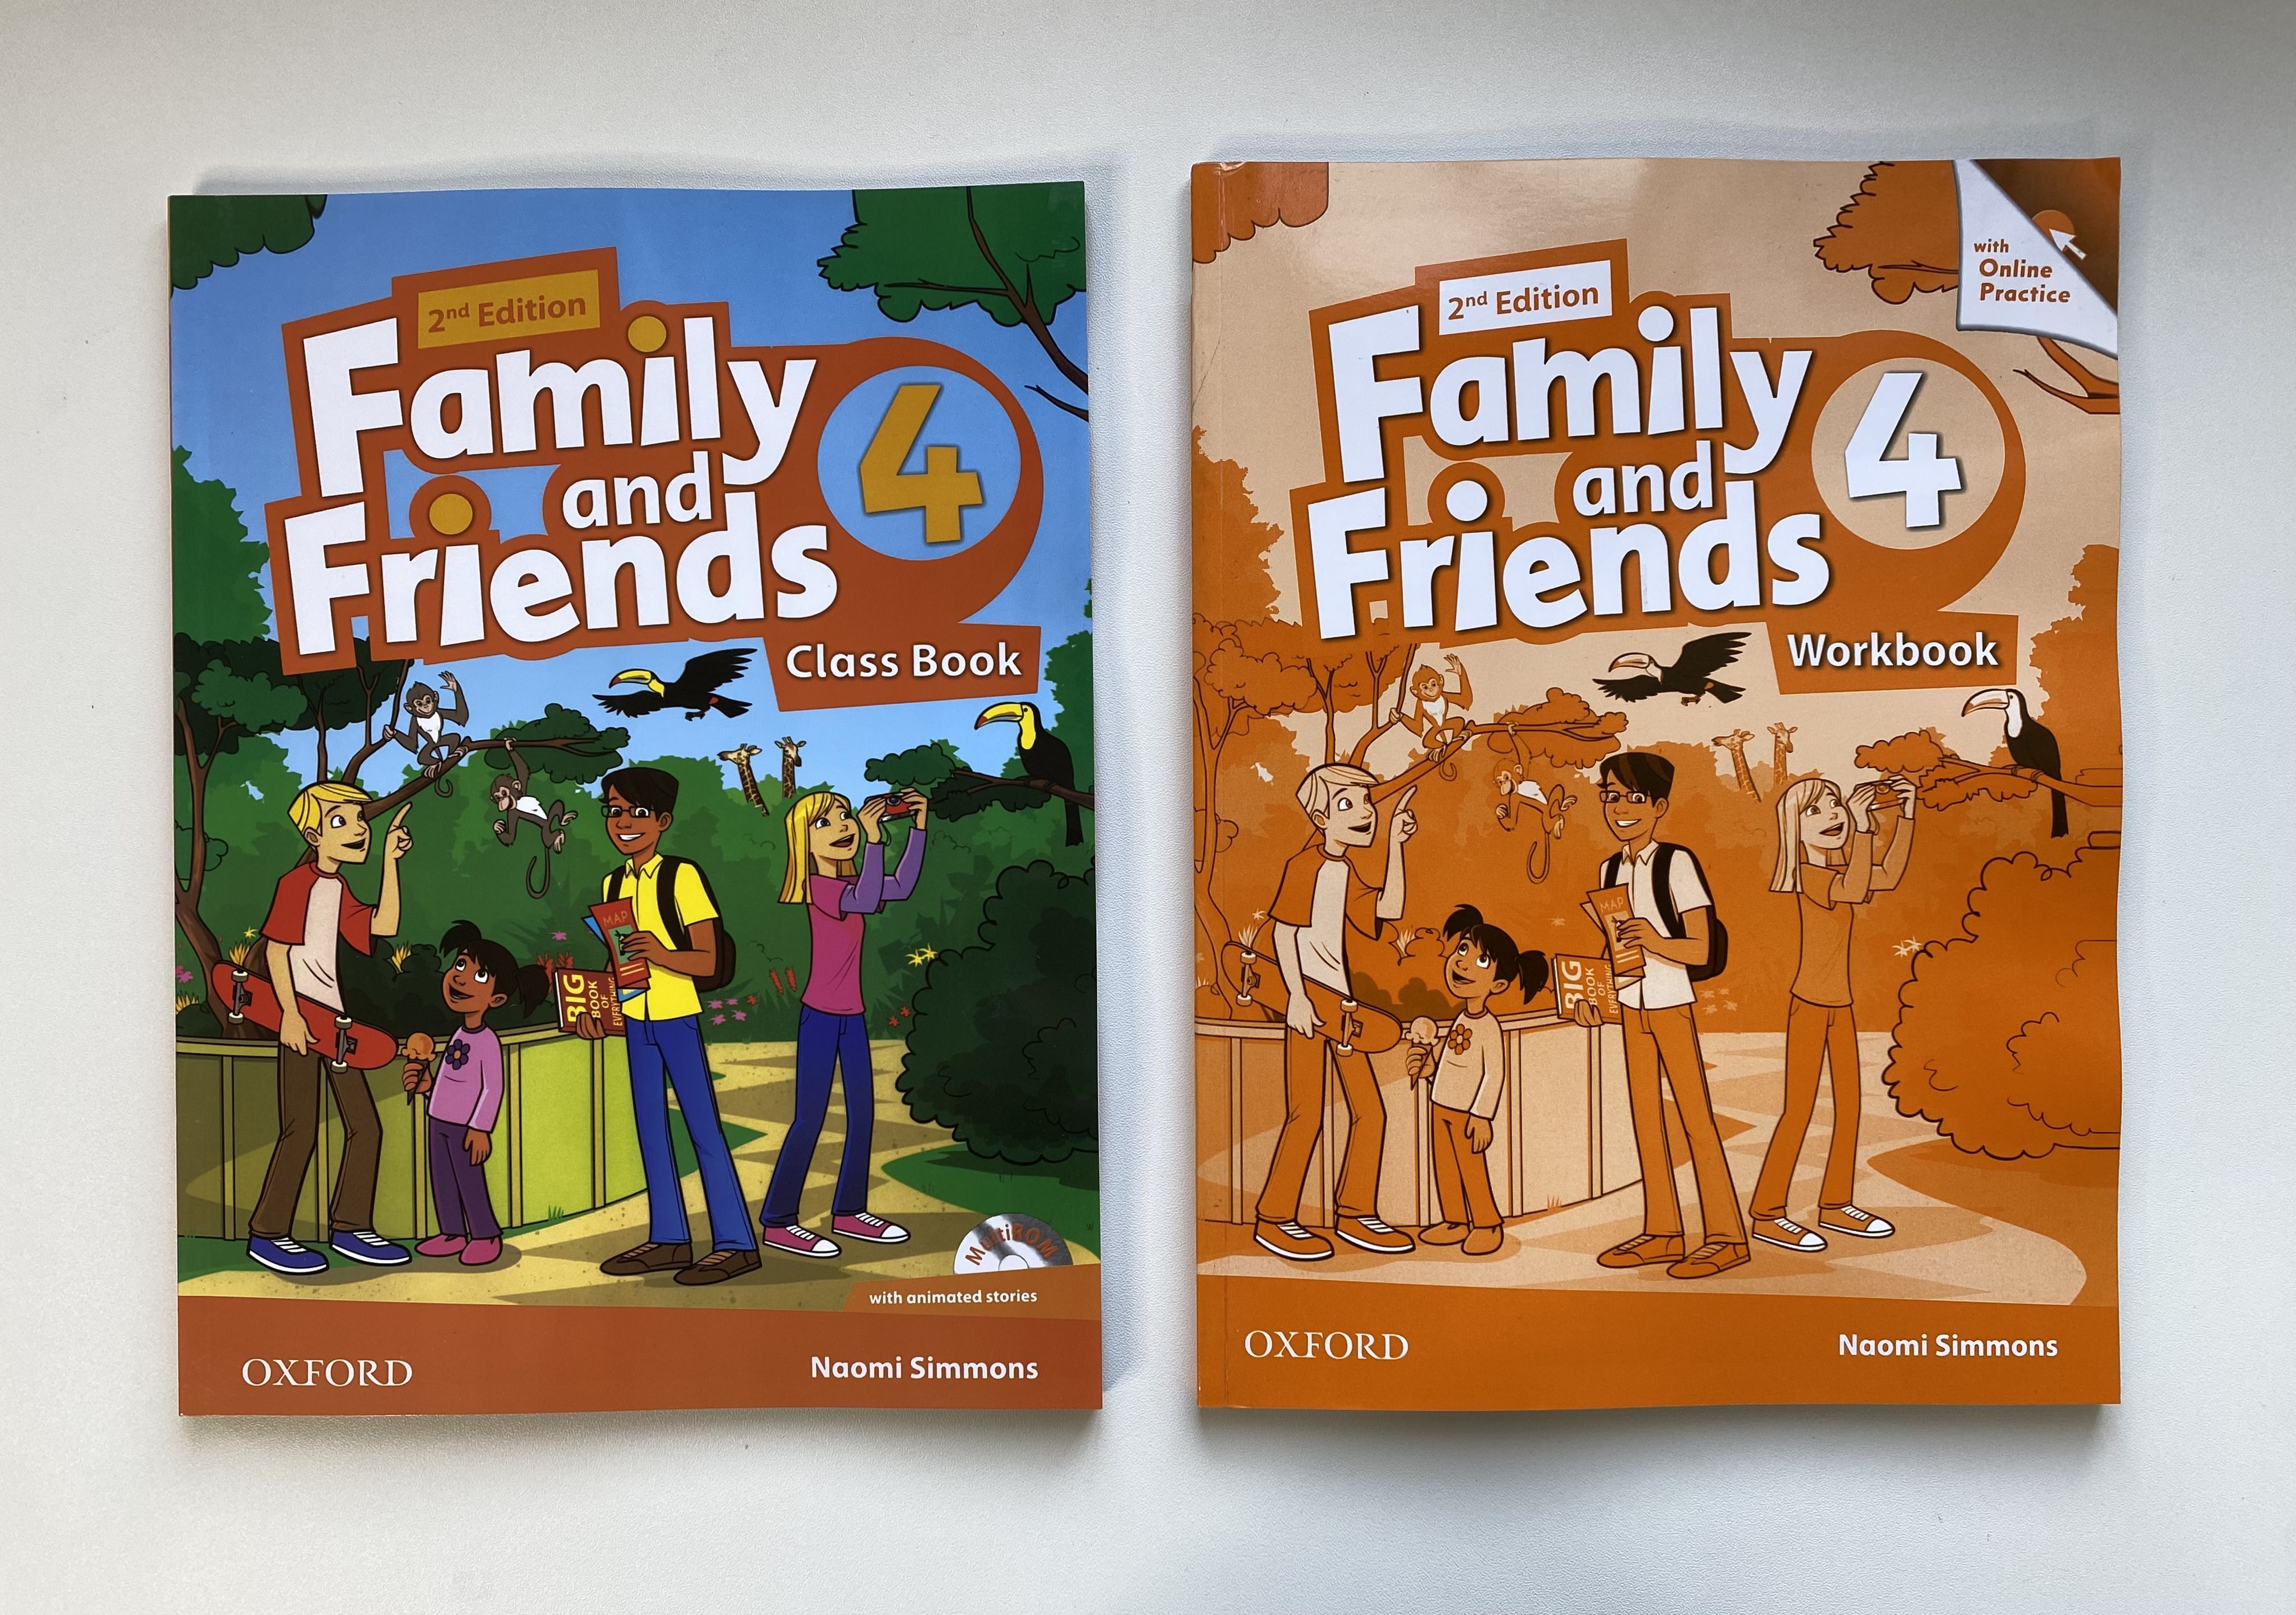 Wordwall family and friends 4. Family and friends 4. Famly ang friends 4 Workbook. Family and friends class book. Family and friends 1 class book.